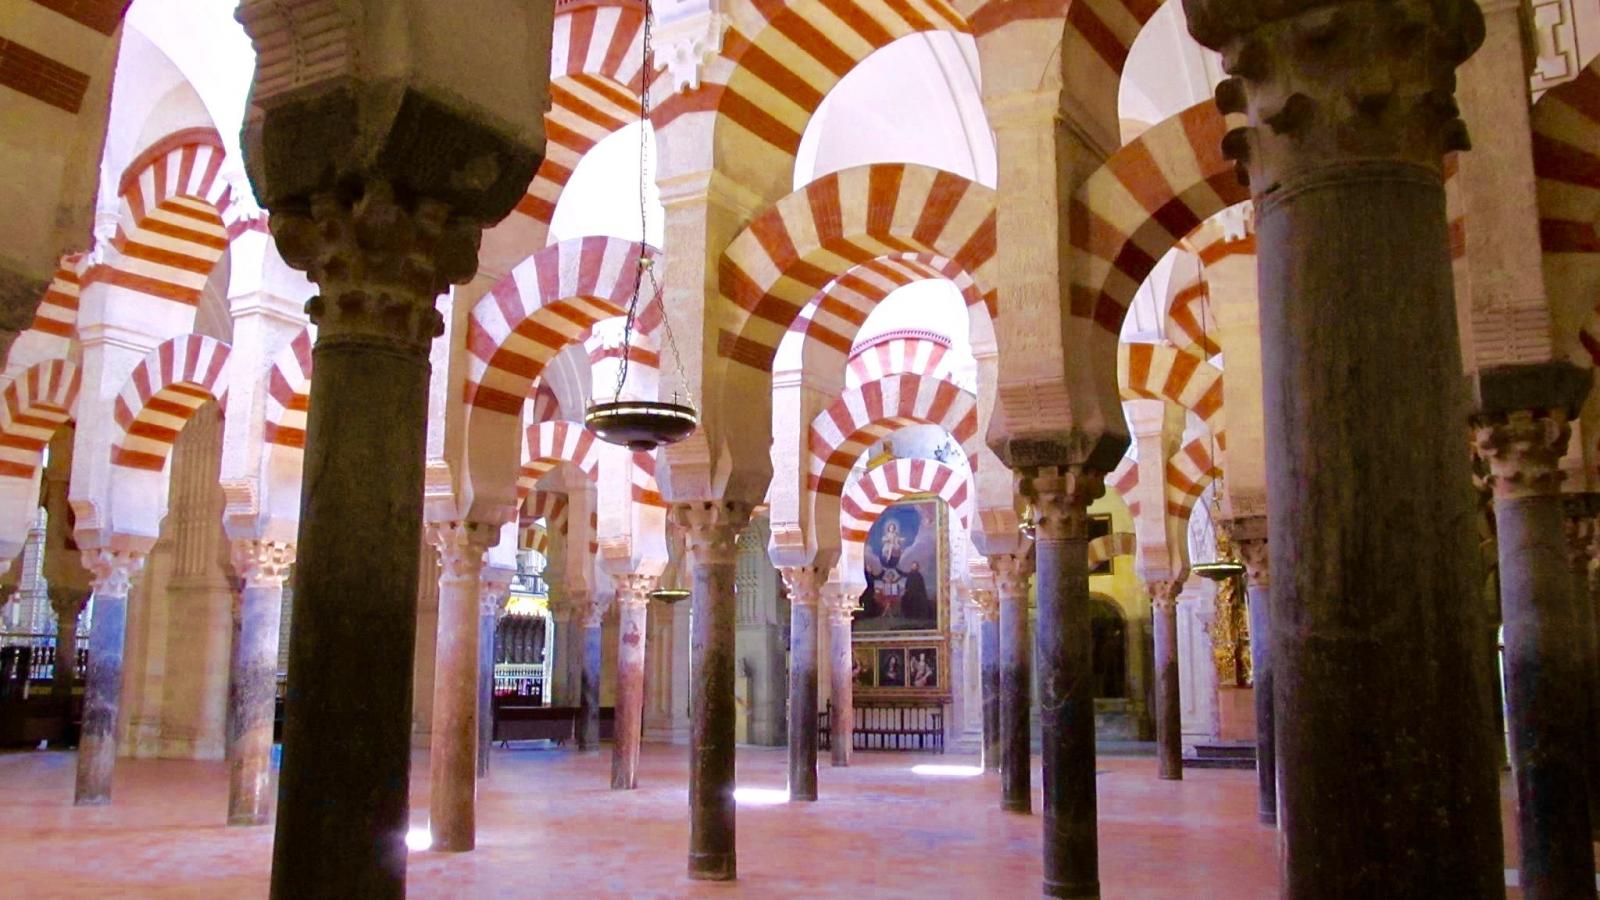 Mezquita Cathedral de Cordoba - Mosque of Cordoba, Cordoba's most famous landmark dating back to the late 8th Century. Photo: Amy Heng